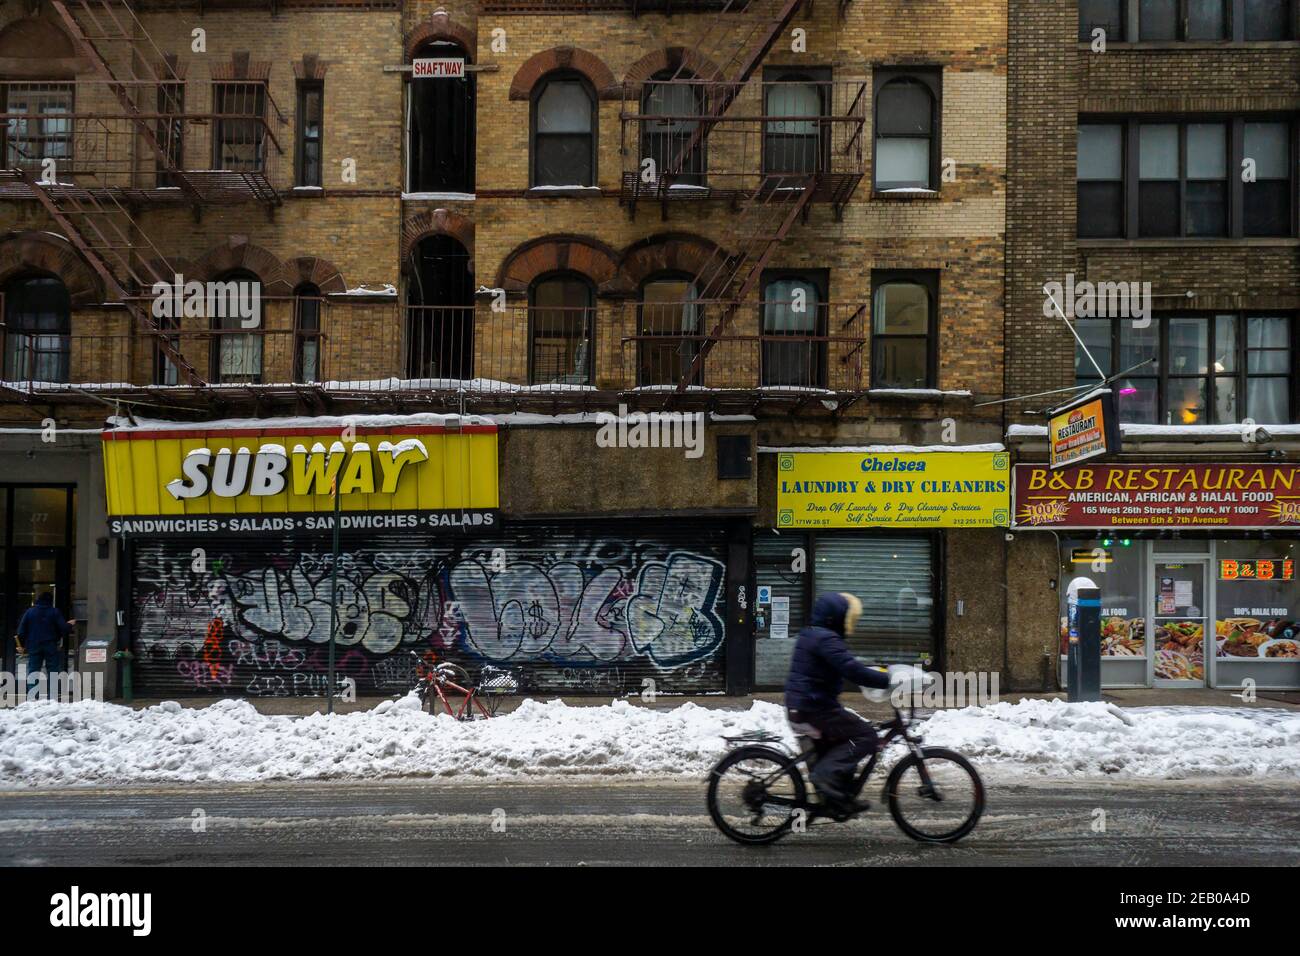 A franchise of the Subway sandwich chain in the Chelsea neighborhood in New York is closed on account of the previous days’ winter storm, onTuesday, February 2, 2021. (© Richard B. Levine) Stock Photo